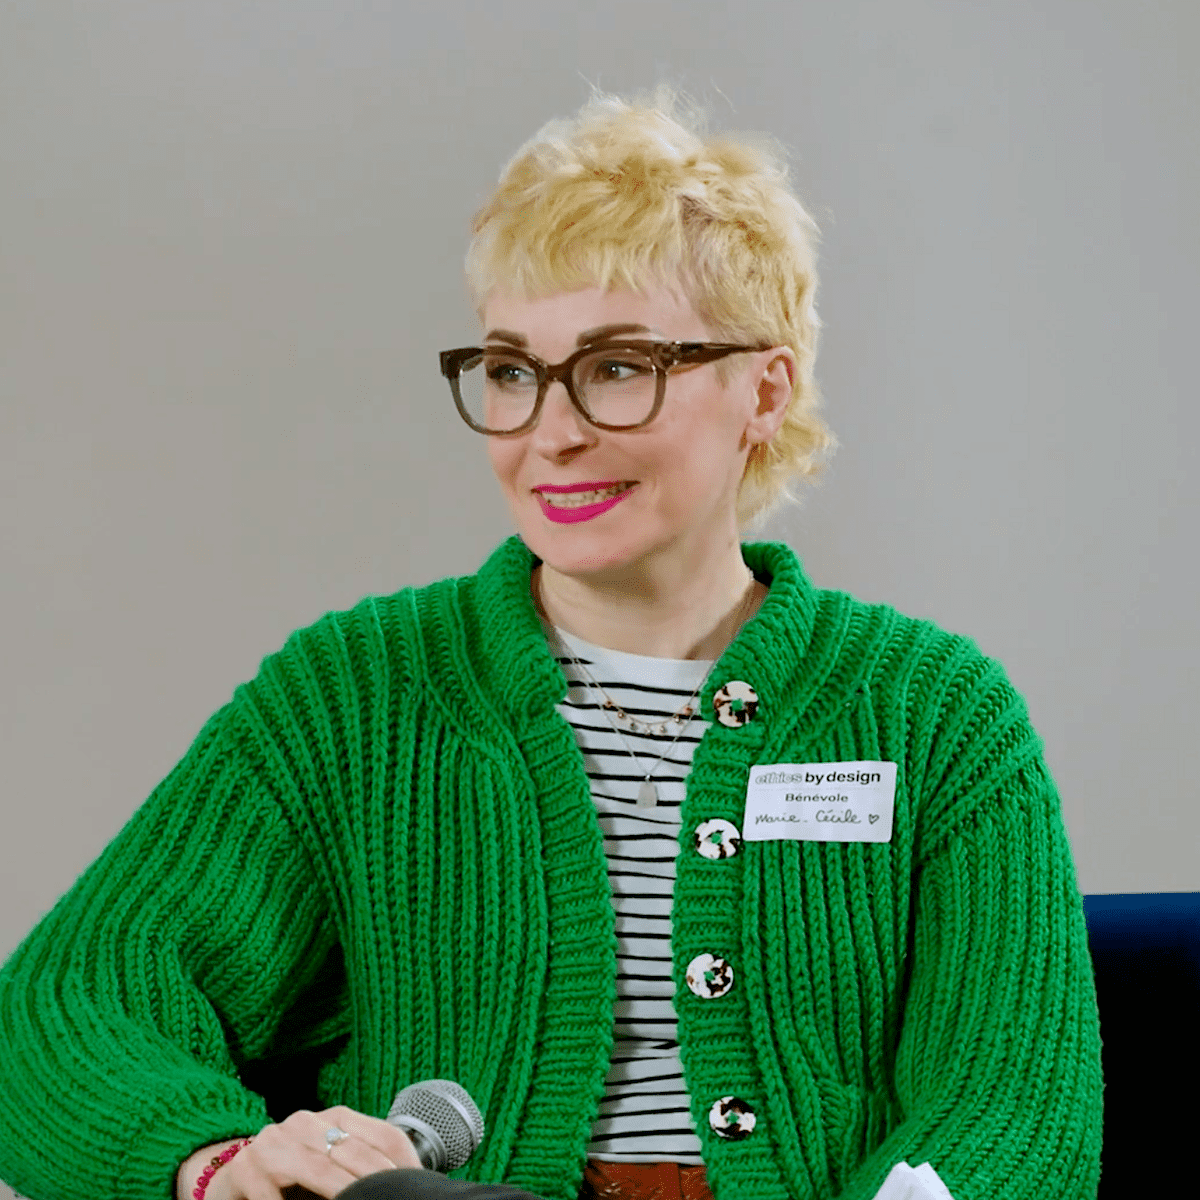 Portrait of Marie-Cécile taken during Ethics By Design 2022. She is smiling, wearing a green cardigan, platinum blonde hair and glasses.